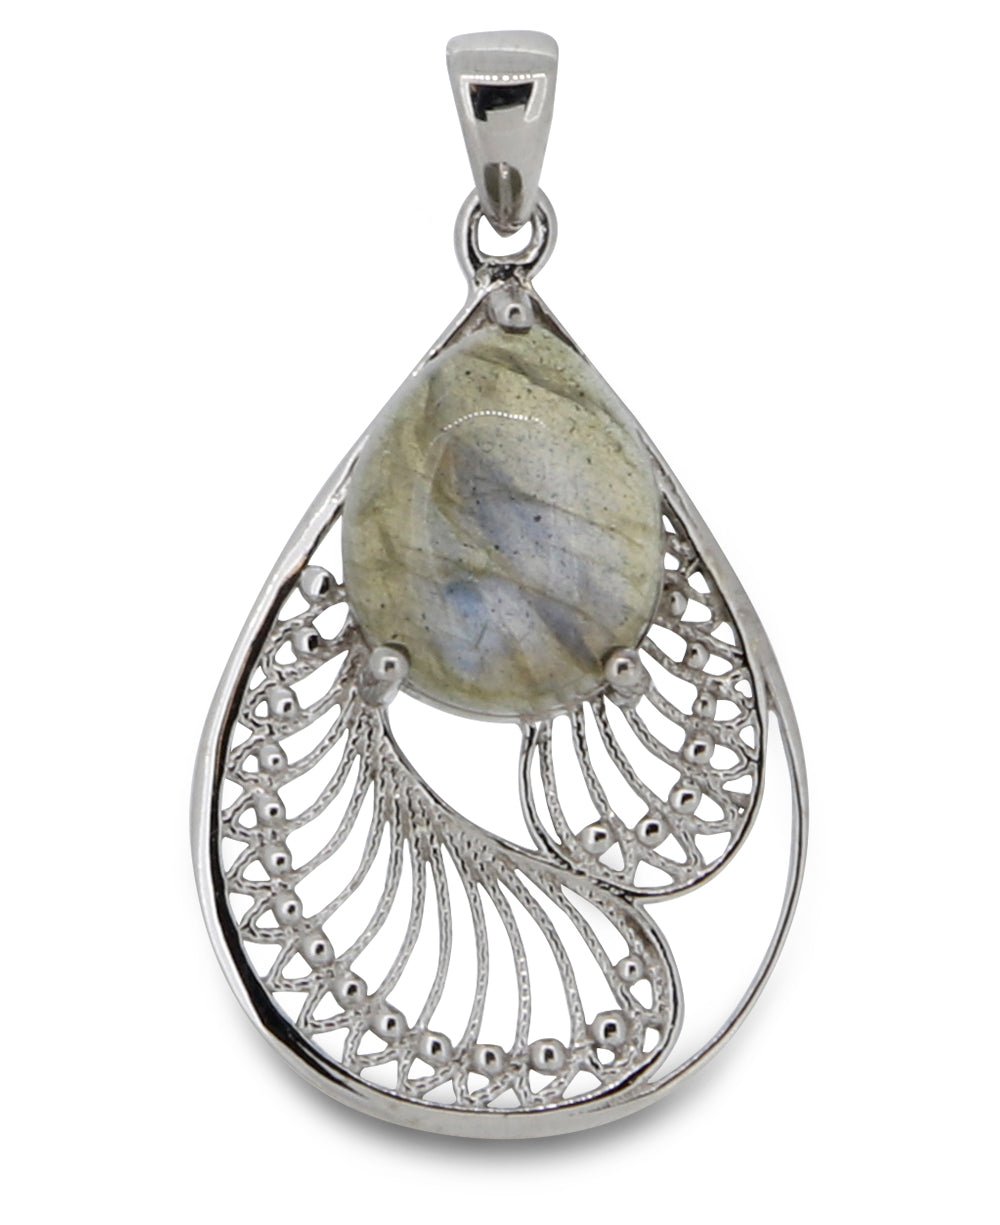 Labradorite Pendant in Sterling Silver Feather Design - Charms & Pendants